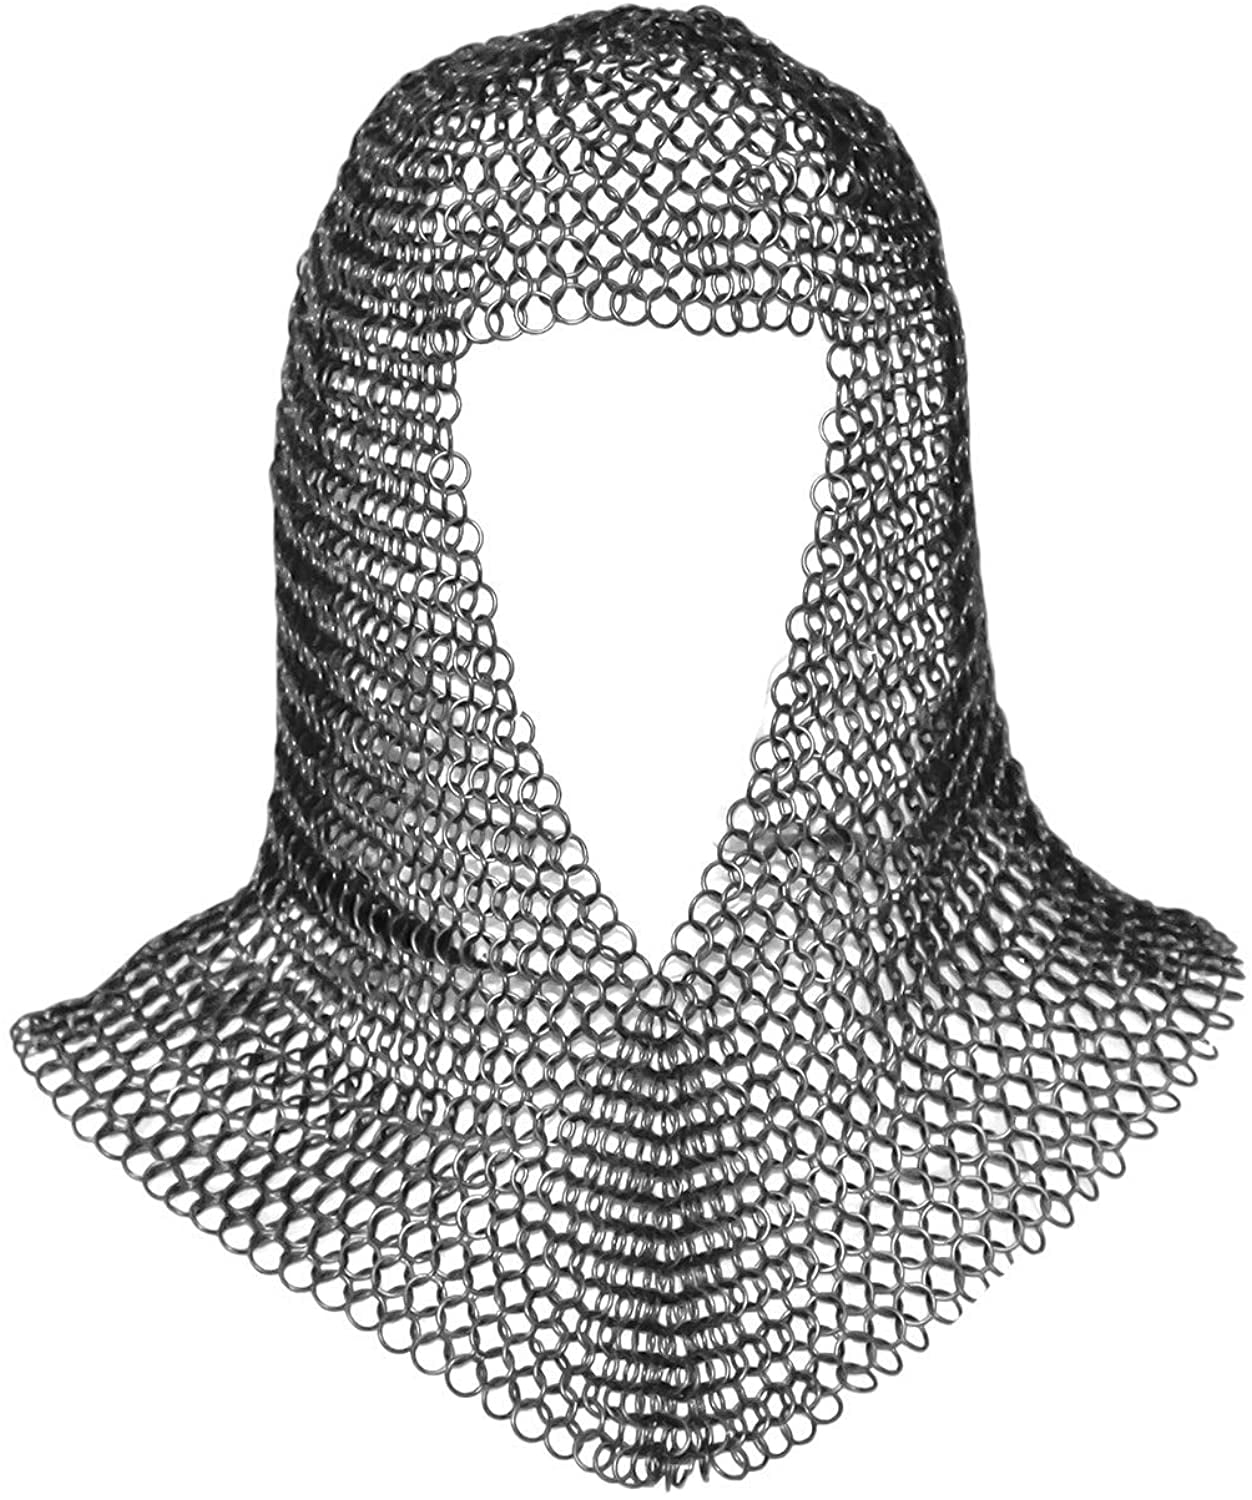 Mythrojan Chainmail Coif Medieval Knight Renaissance Armor Chain Mail Hood Viking LARP 16 Gauge 